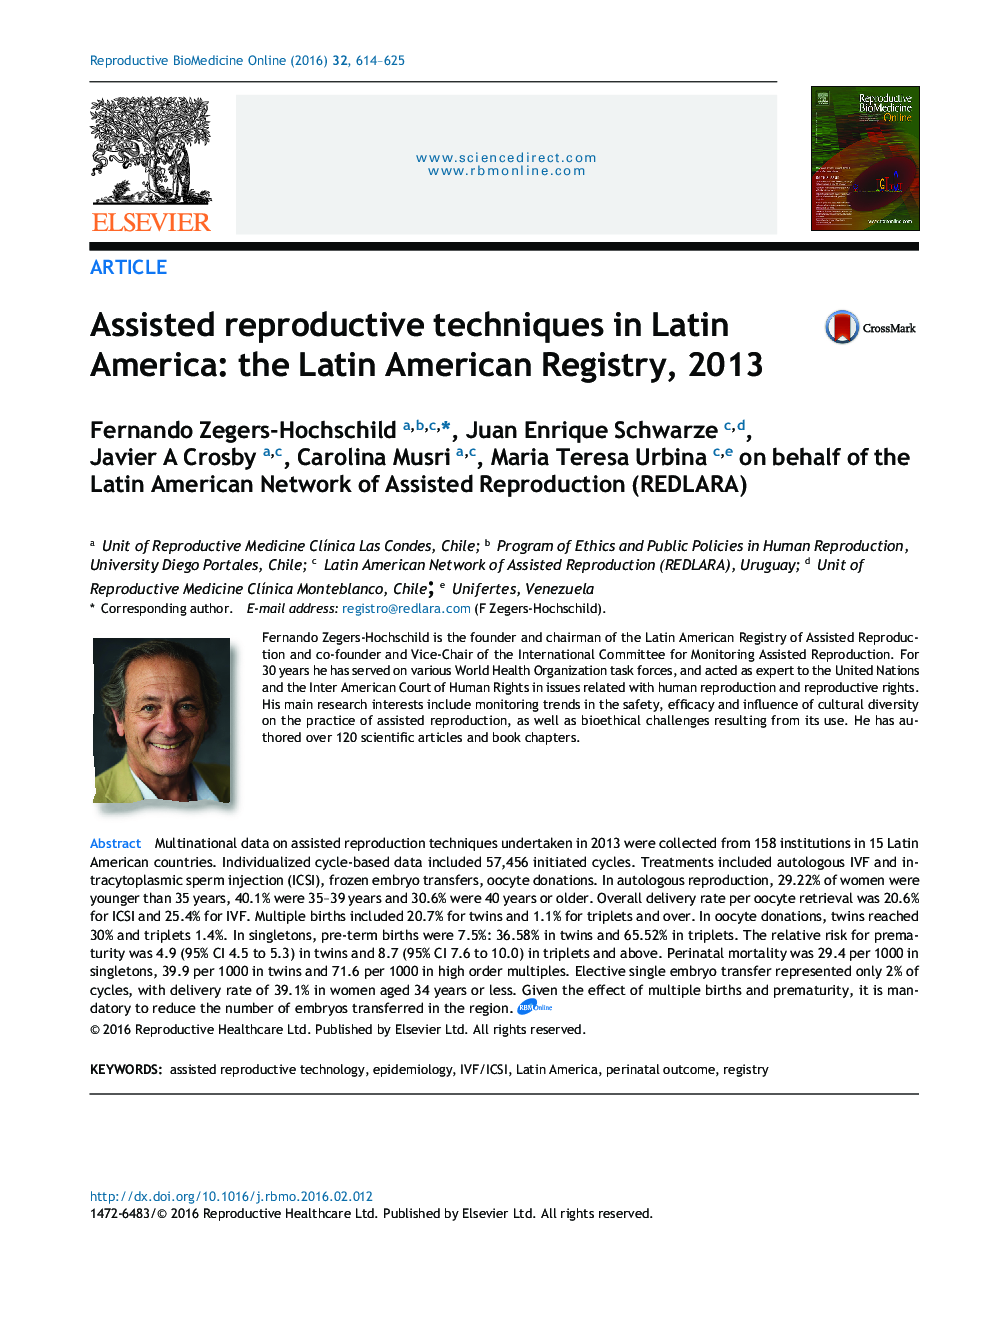 Assisted reproductive techniques in Latin America: the Latin American Registry, 2013